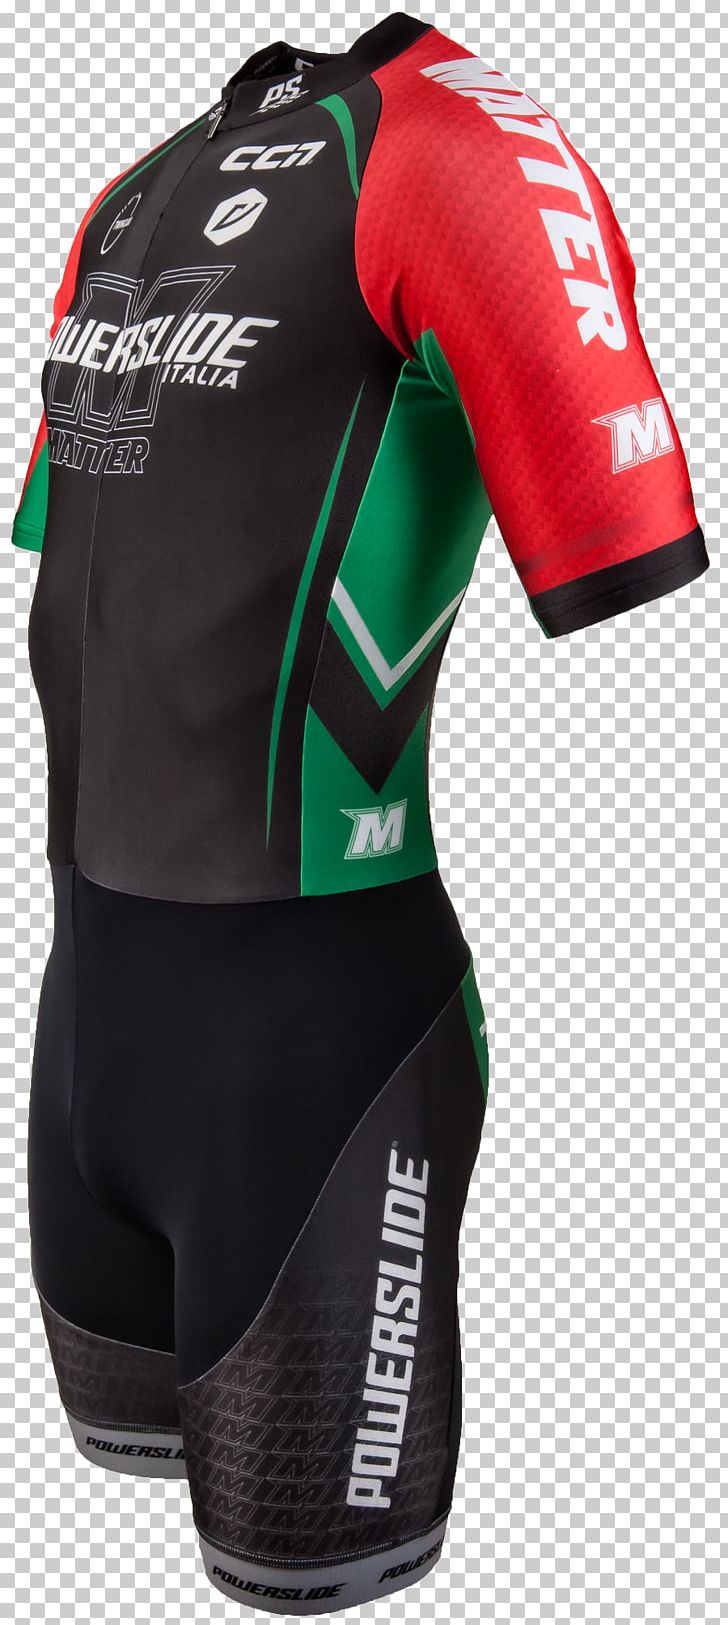 Motorcycle Accessories Protective Gear In Sports Clothing Sleeve PNG, Clipart, Bicycle, Bicycle Clothing, Cars, Clothing, Jersey Free PNG Download